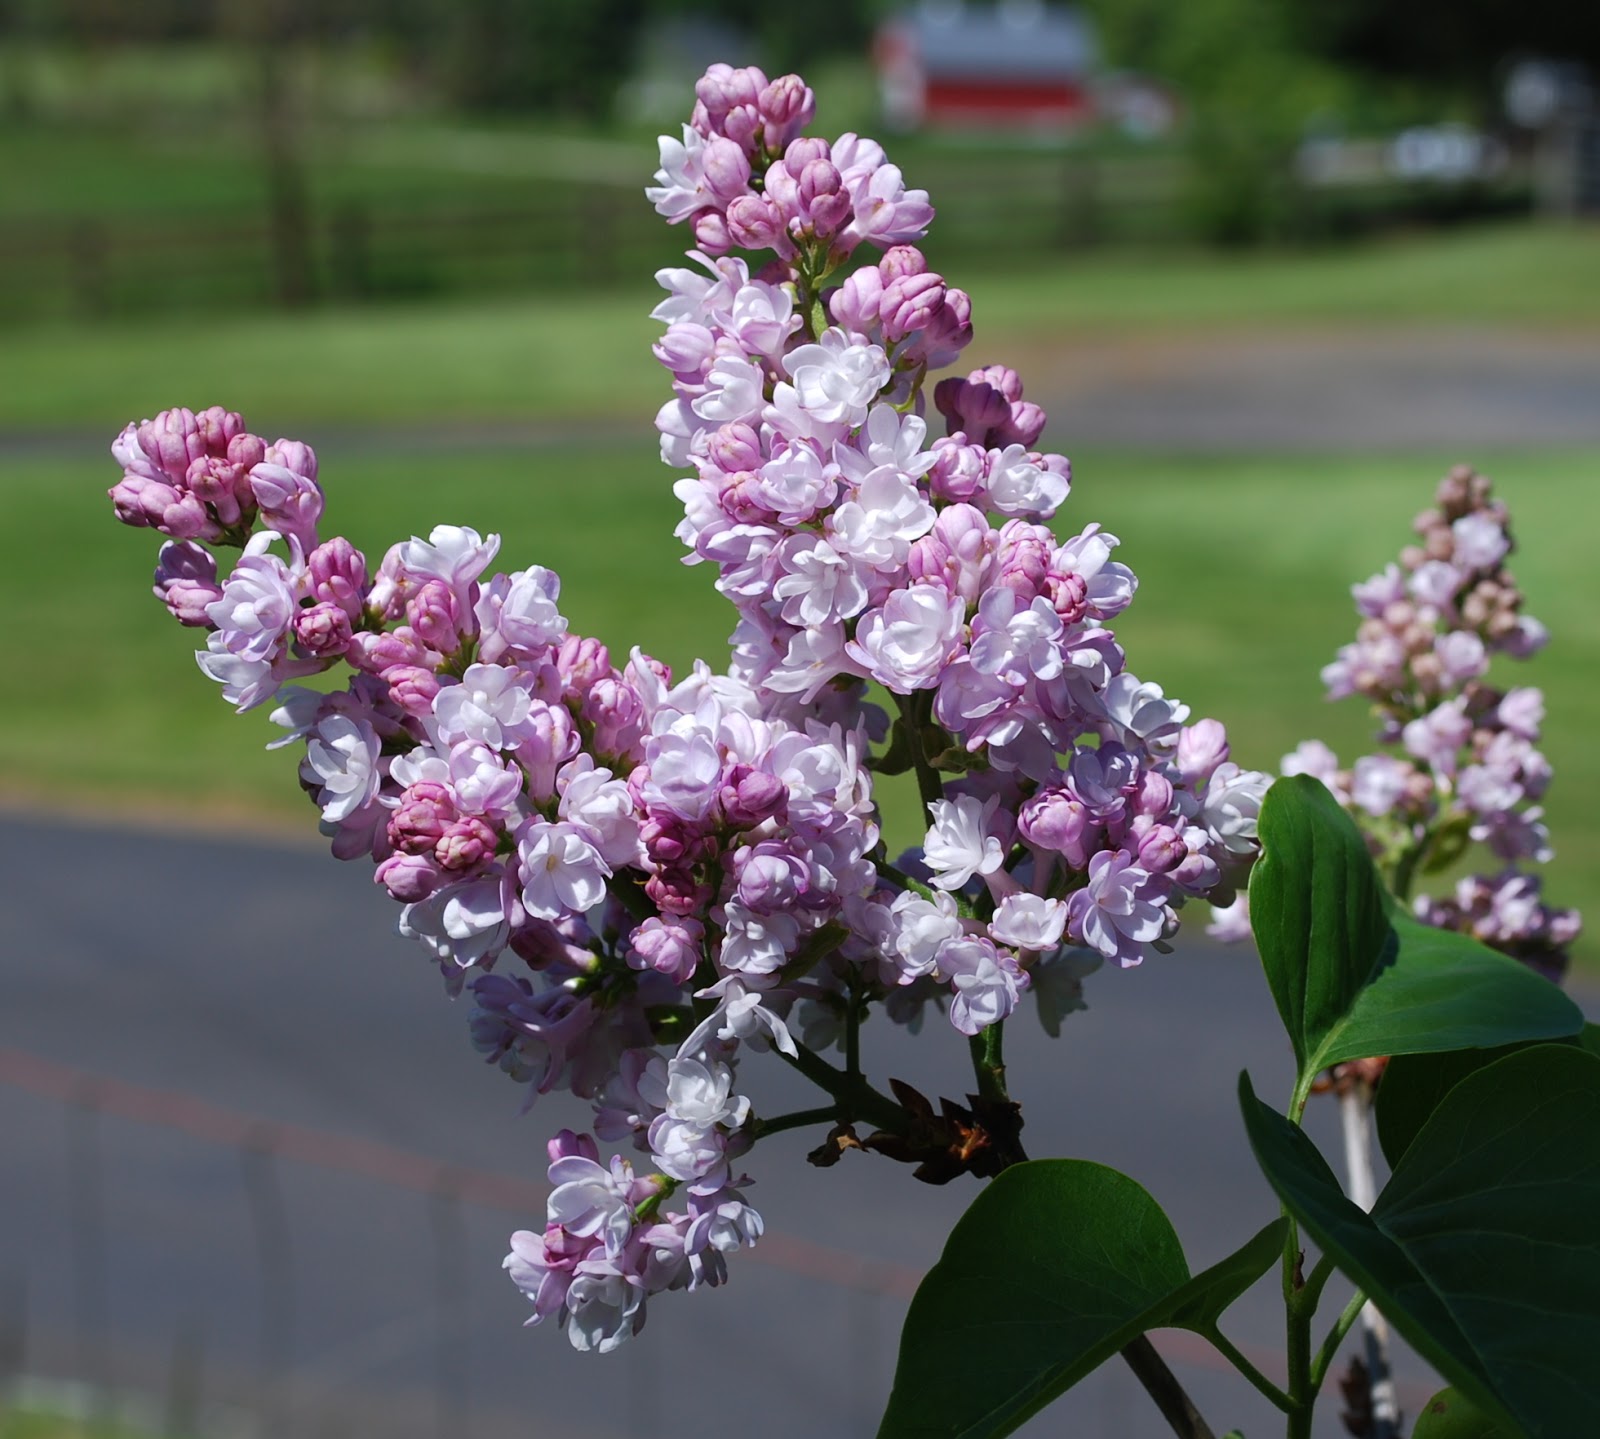 Growing Greener in the Pacific Northwest: More Lilac Blossoms. 5.8.17